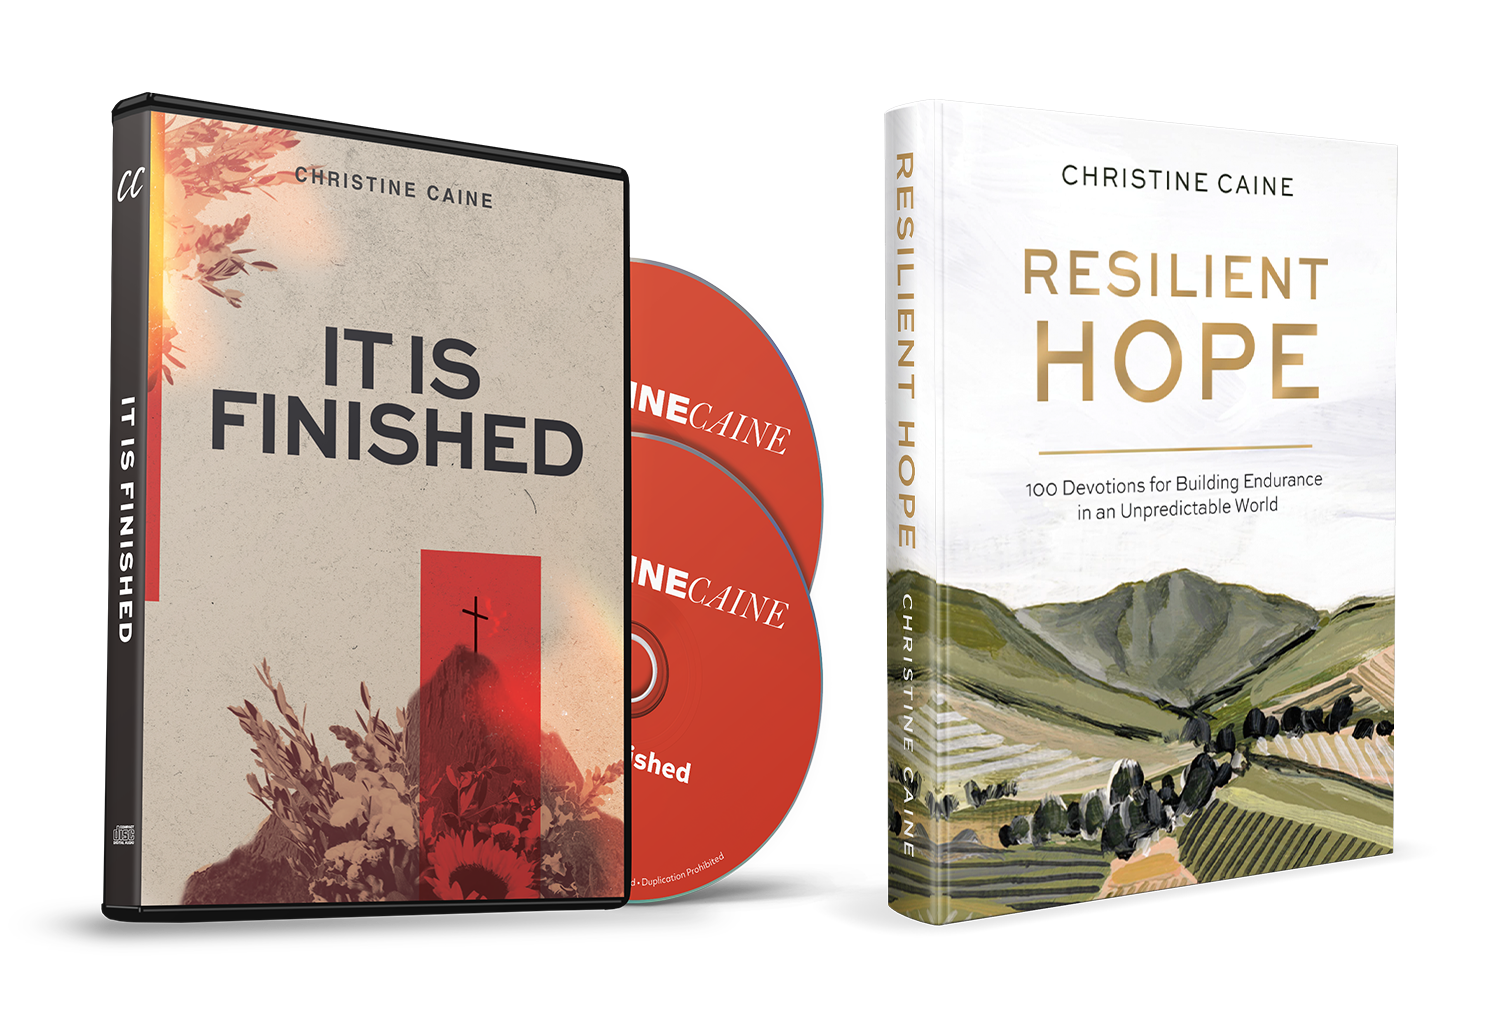 It is Finished and Resilient Hope by Christine Caine on TBN